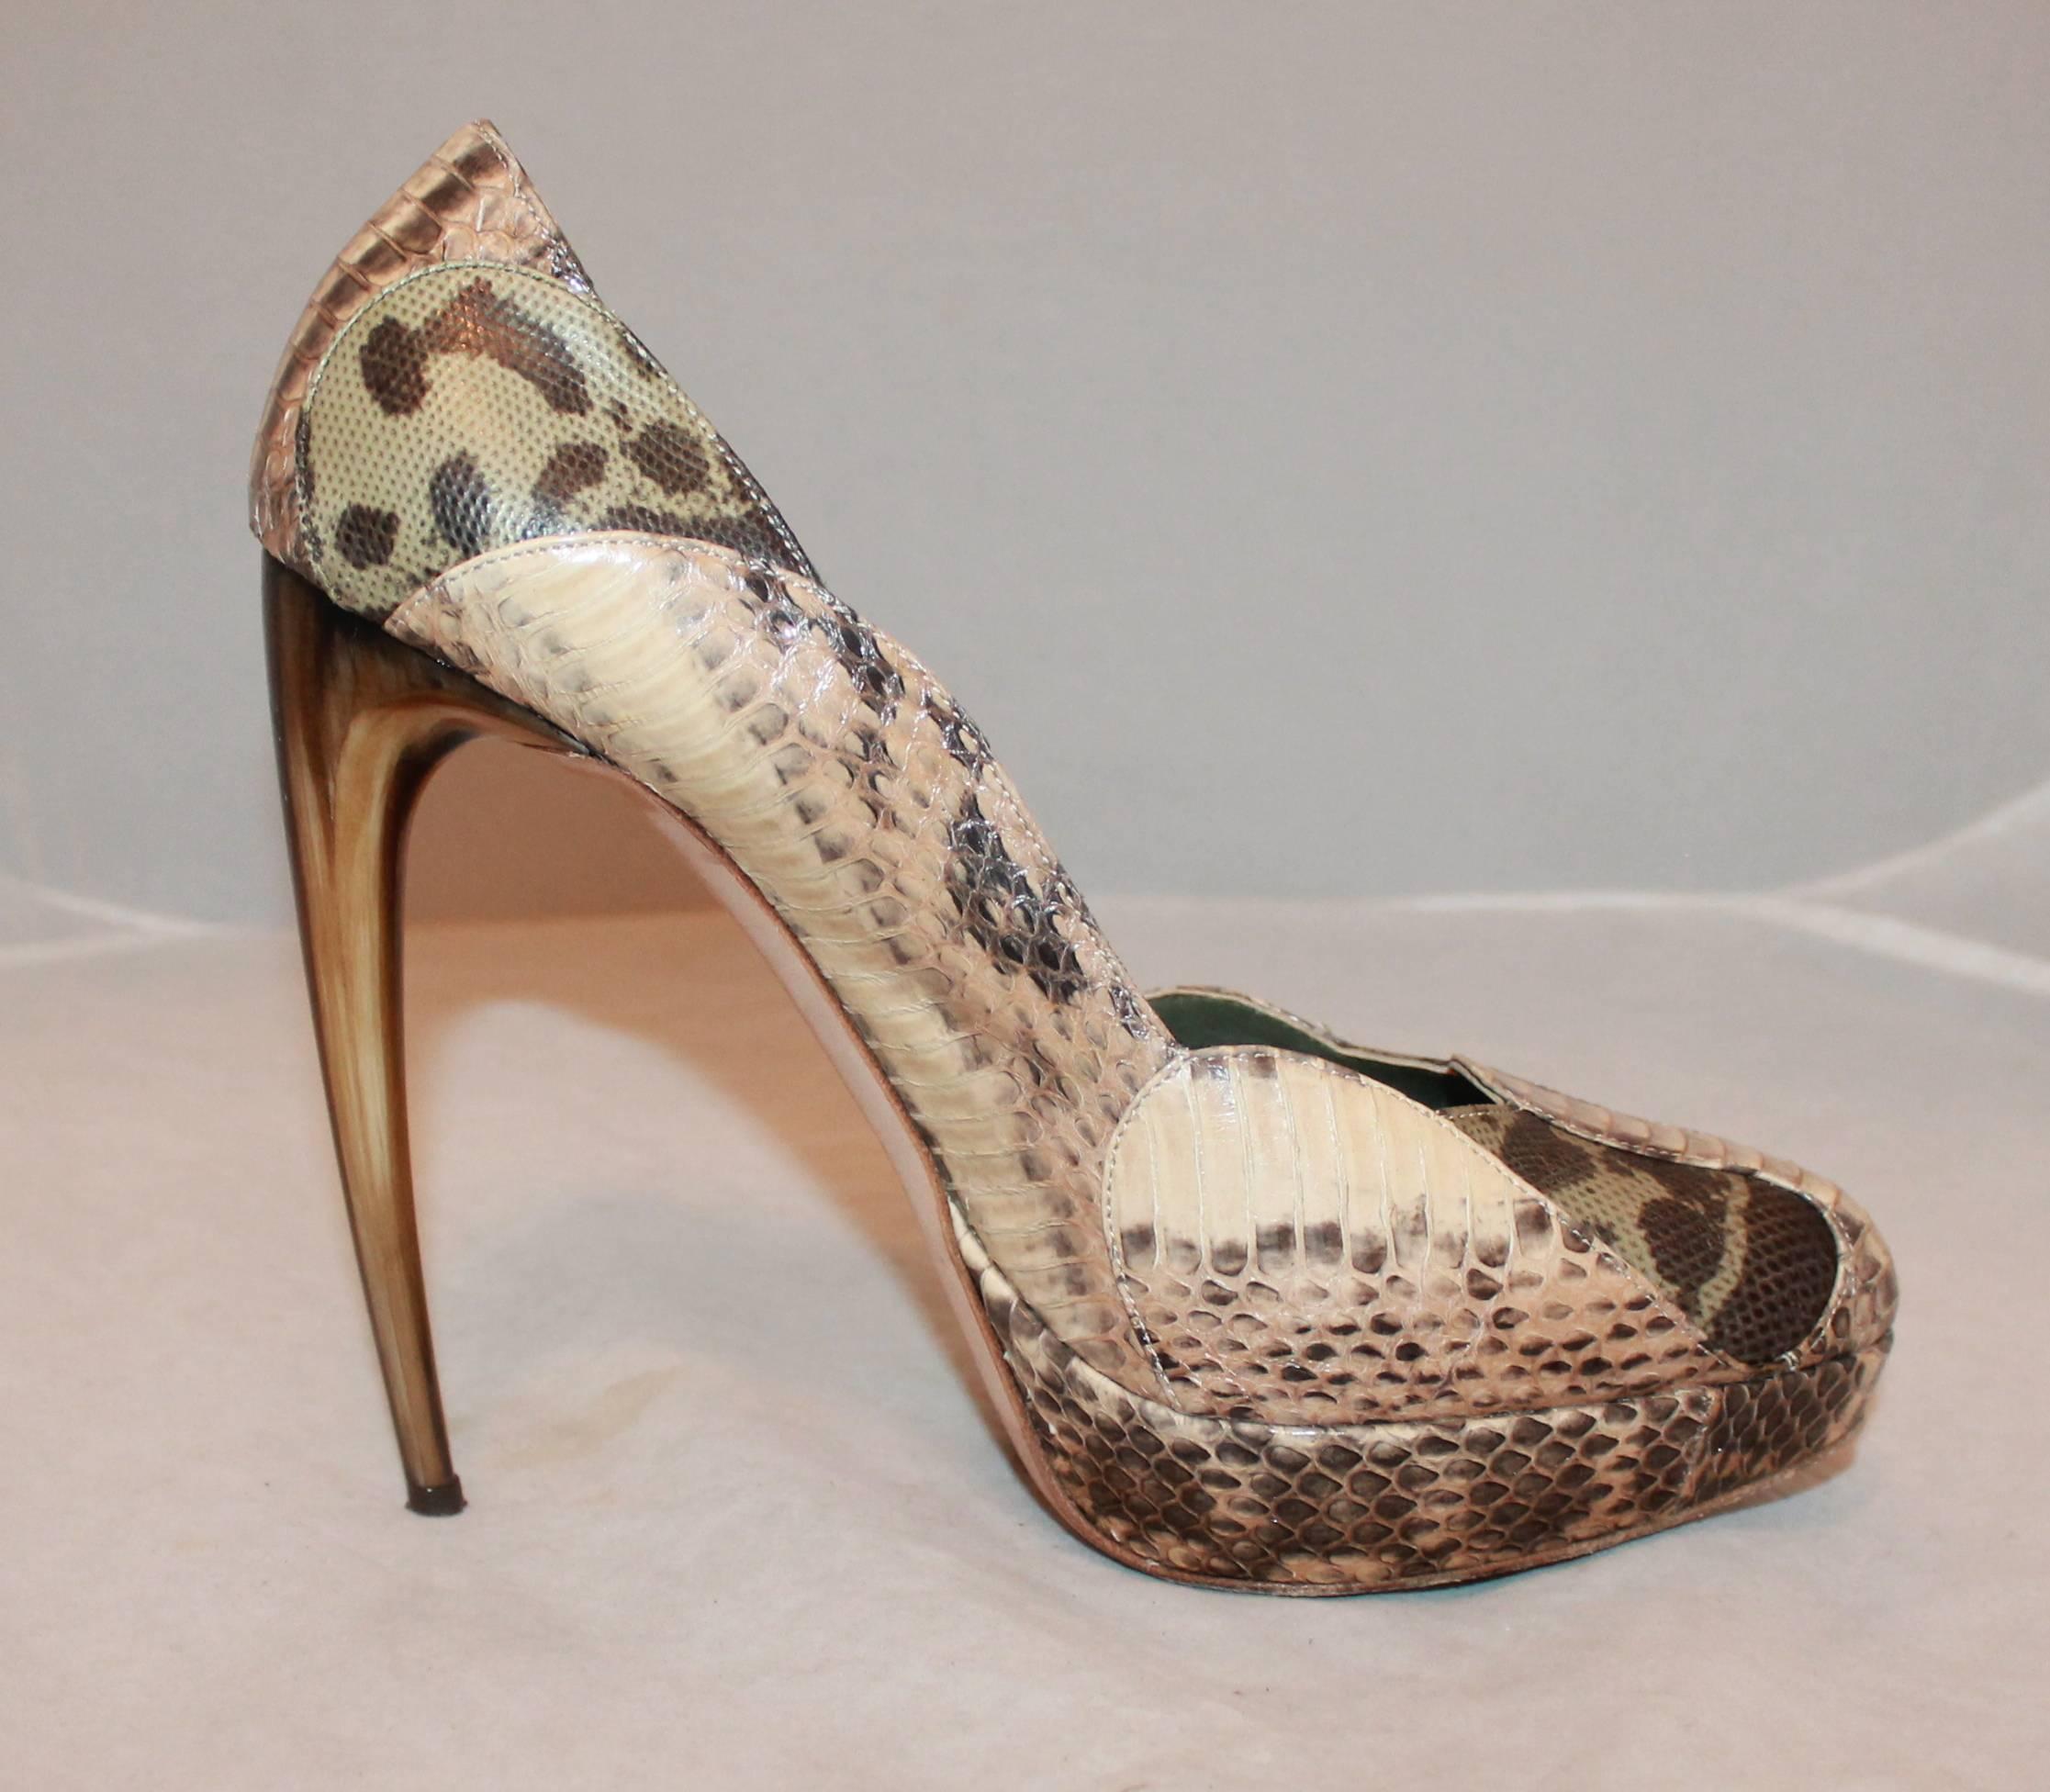 Alexander McQueen Earthtone Snake Skin & Lizard Patchwork Pumps - 41.  These exquisite pumps are in very good condition with only some wear and slight scuffing to the heel, and wear on the bottom of the shoe.  These unique Alexander McQueen Pumps